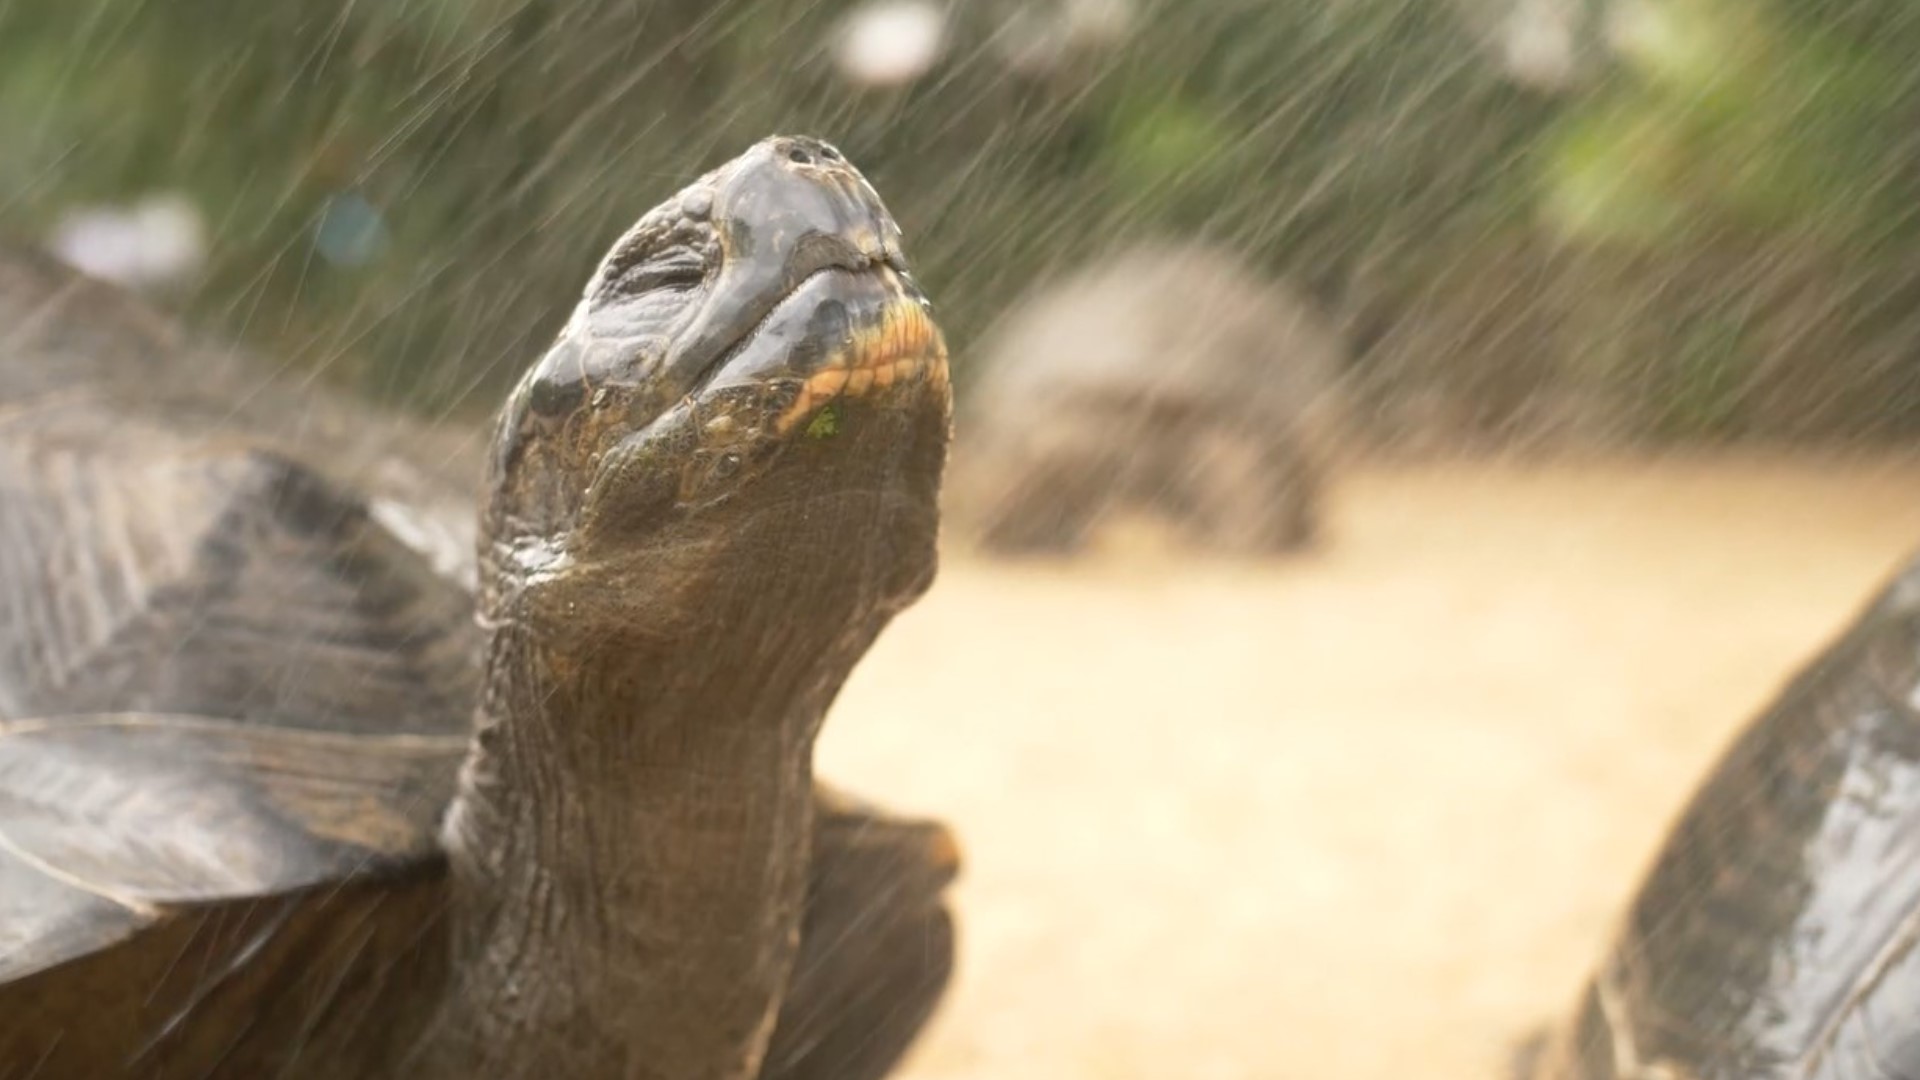 The animals at the Houston Zoo were treated to cool sprays, buckets of ice, swimming and sweet summertime treats to make the heat a little more bearable.